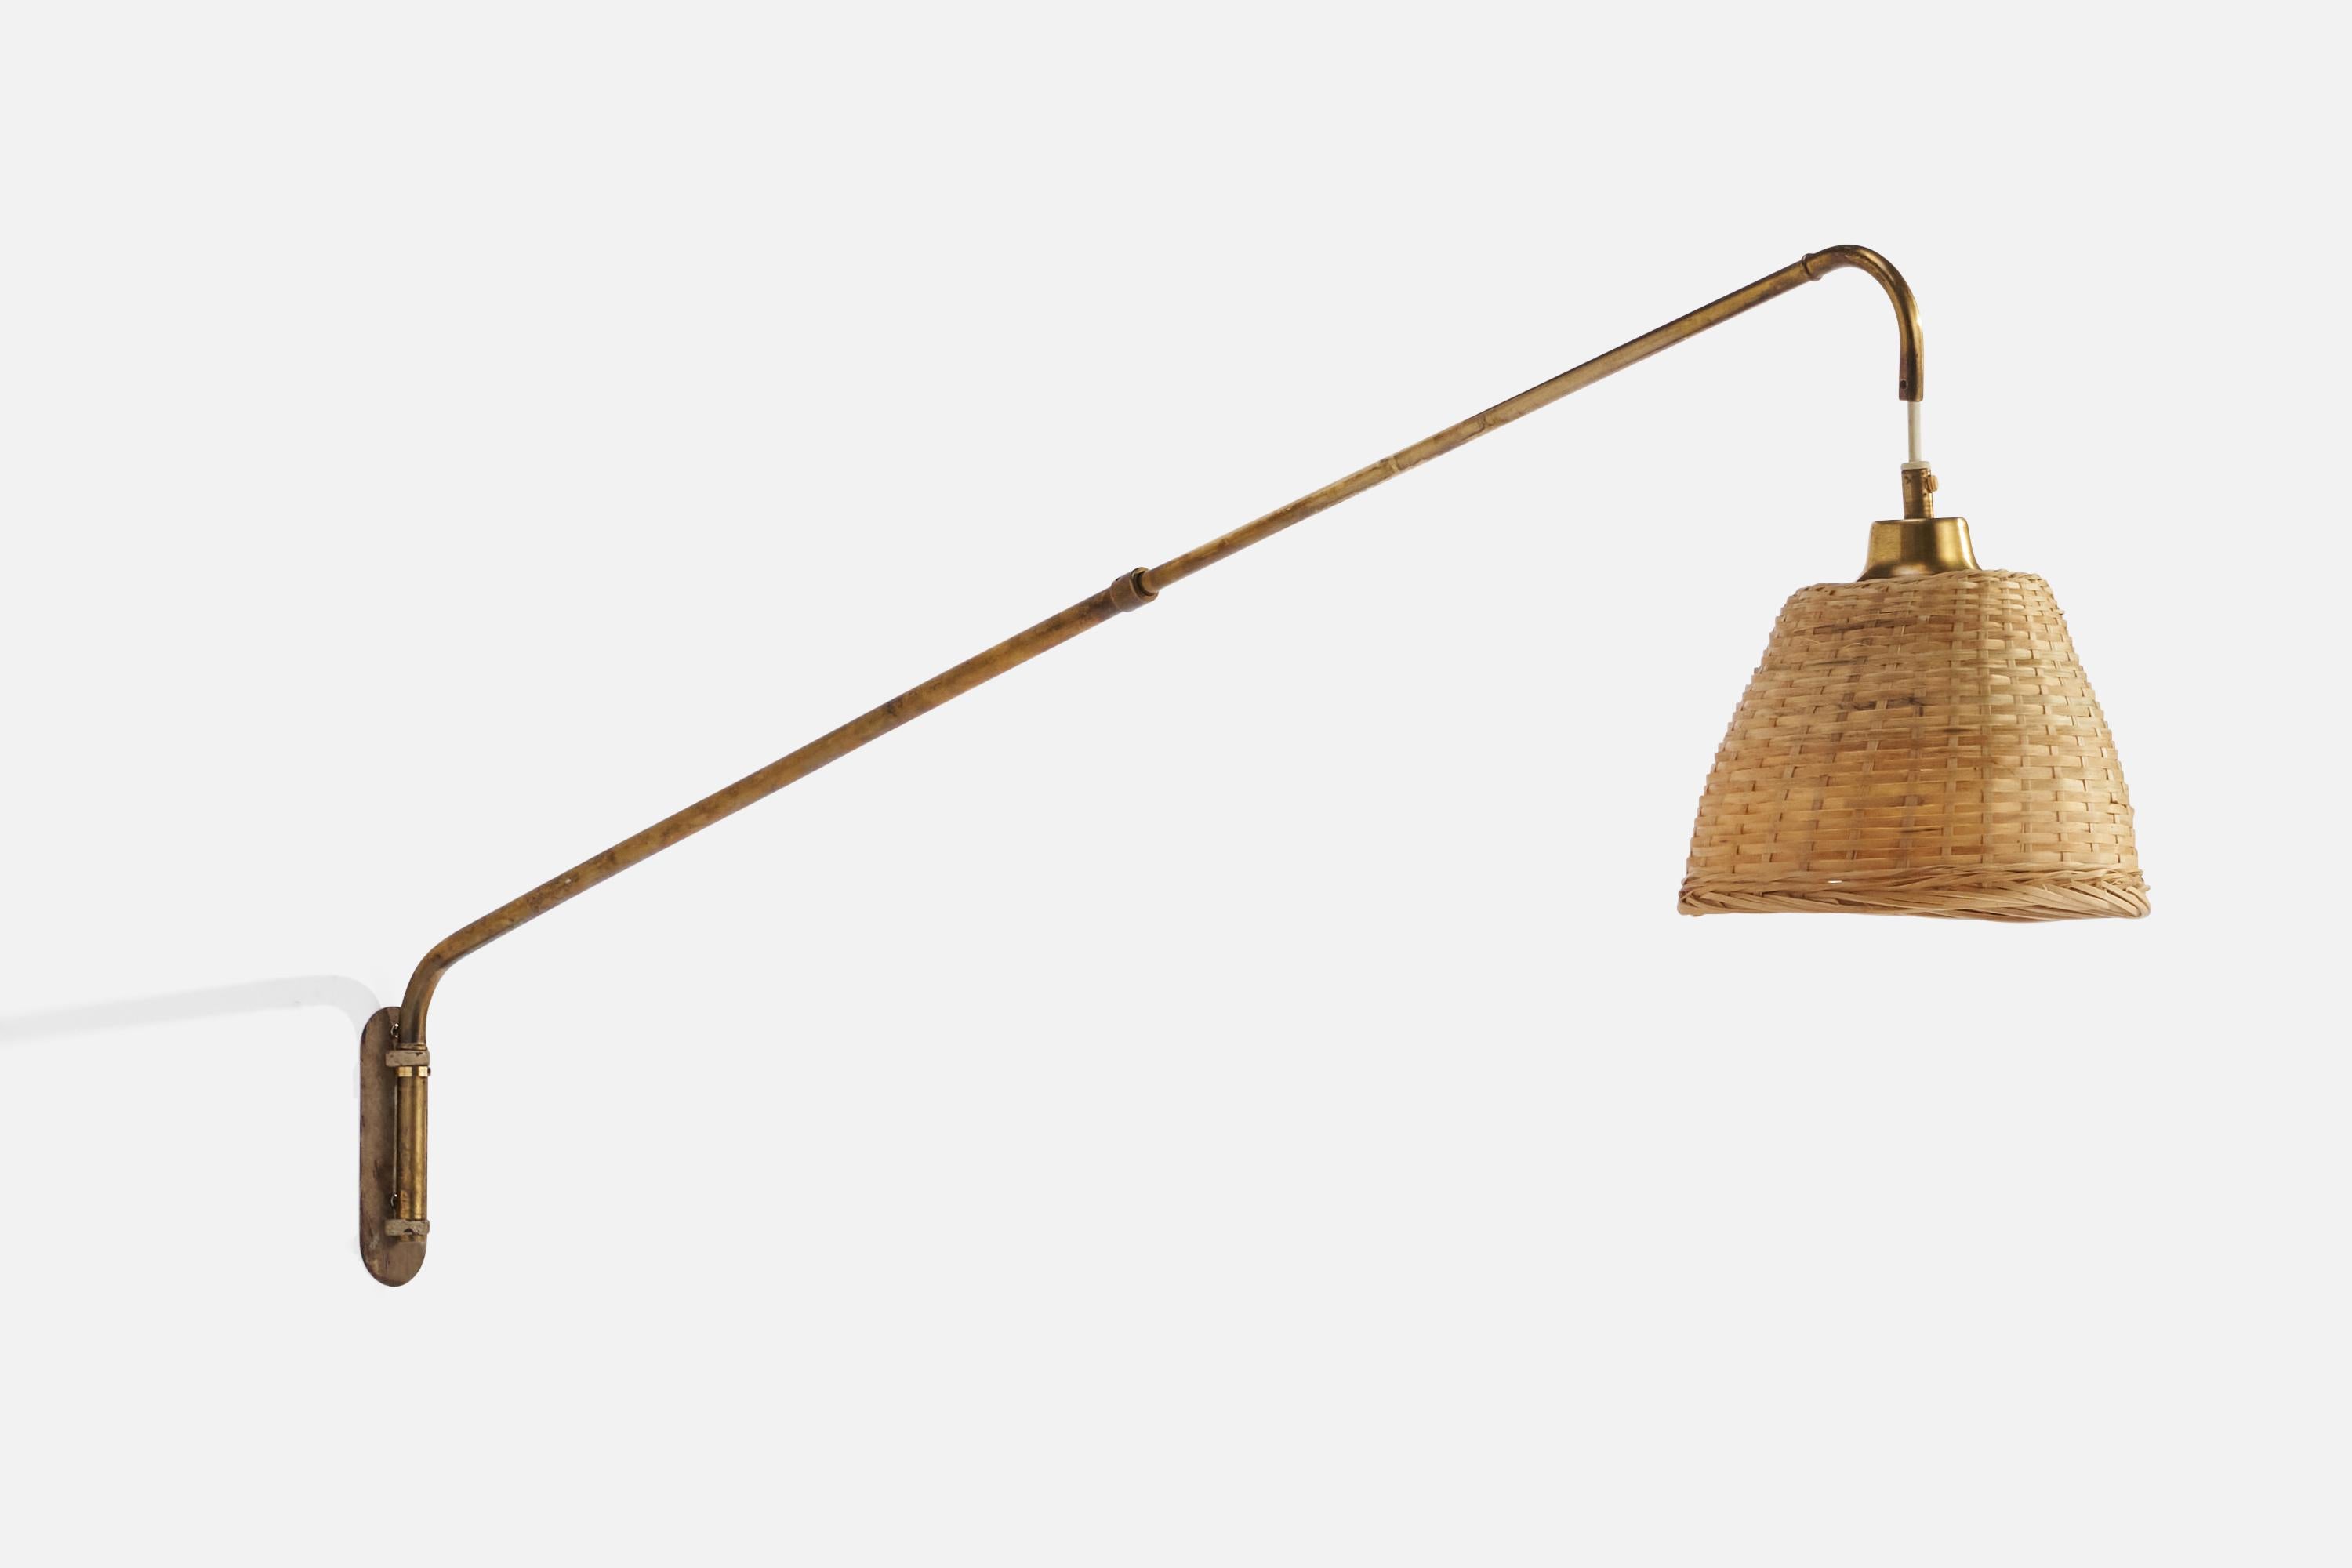 An adjustable brass and rattan wall light designed and produced in Sweden, 1940s.

Overall Dimensions (inches): 6.8” H x 18.5” W x 39.5” D
Back Plate Dimensions (inches): 5” H x 1.5” W x .25” D
Bulb Specifications: E-26 Bulb
Number of Sockets: 1
All